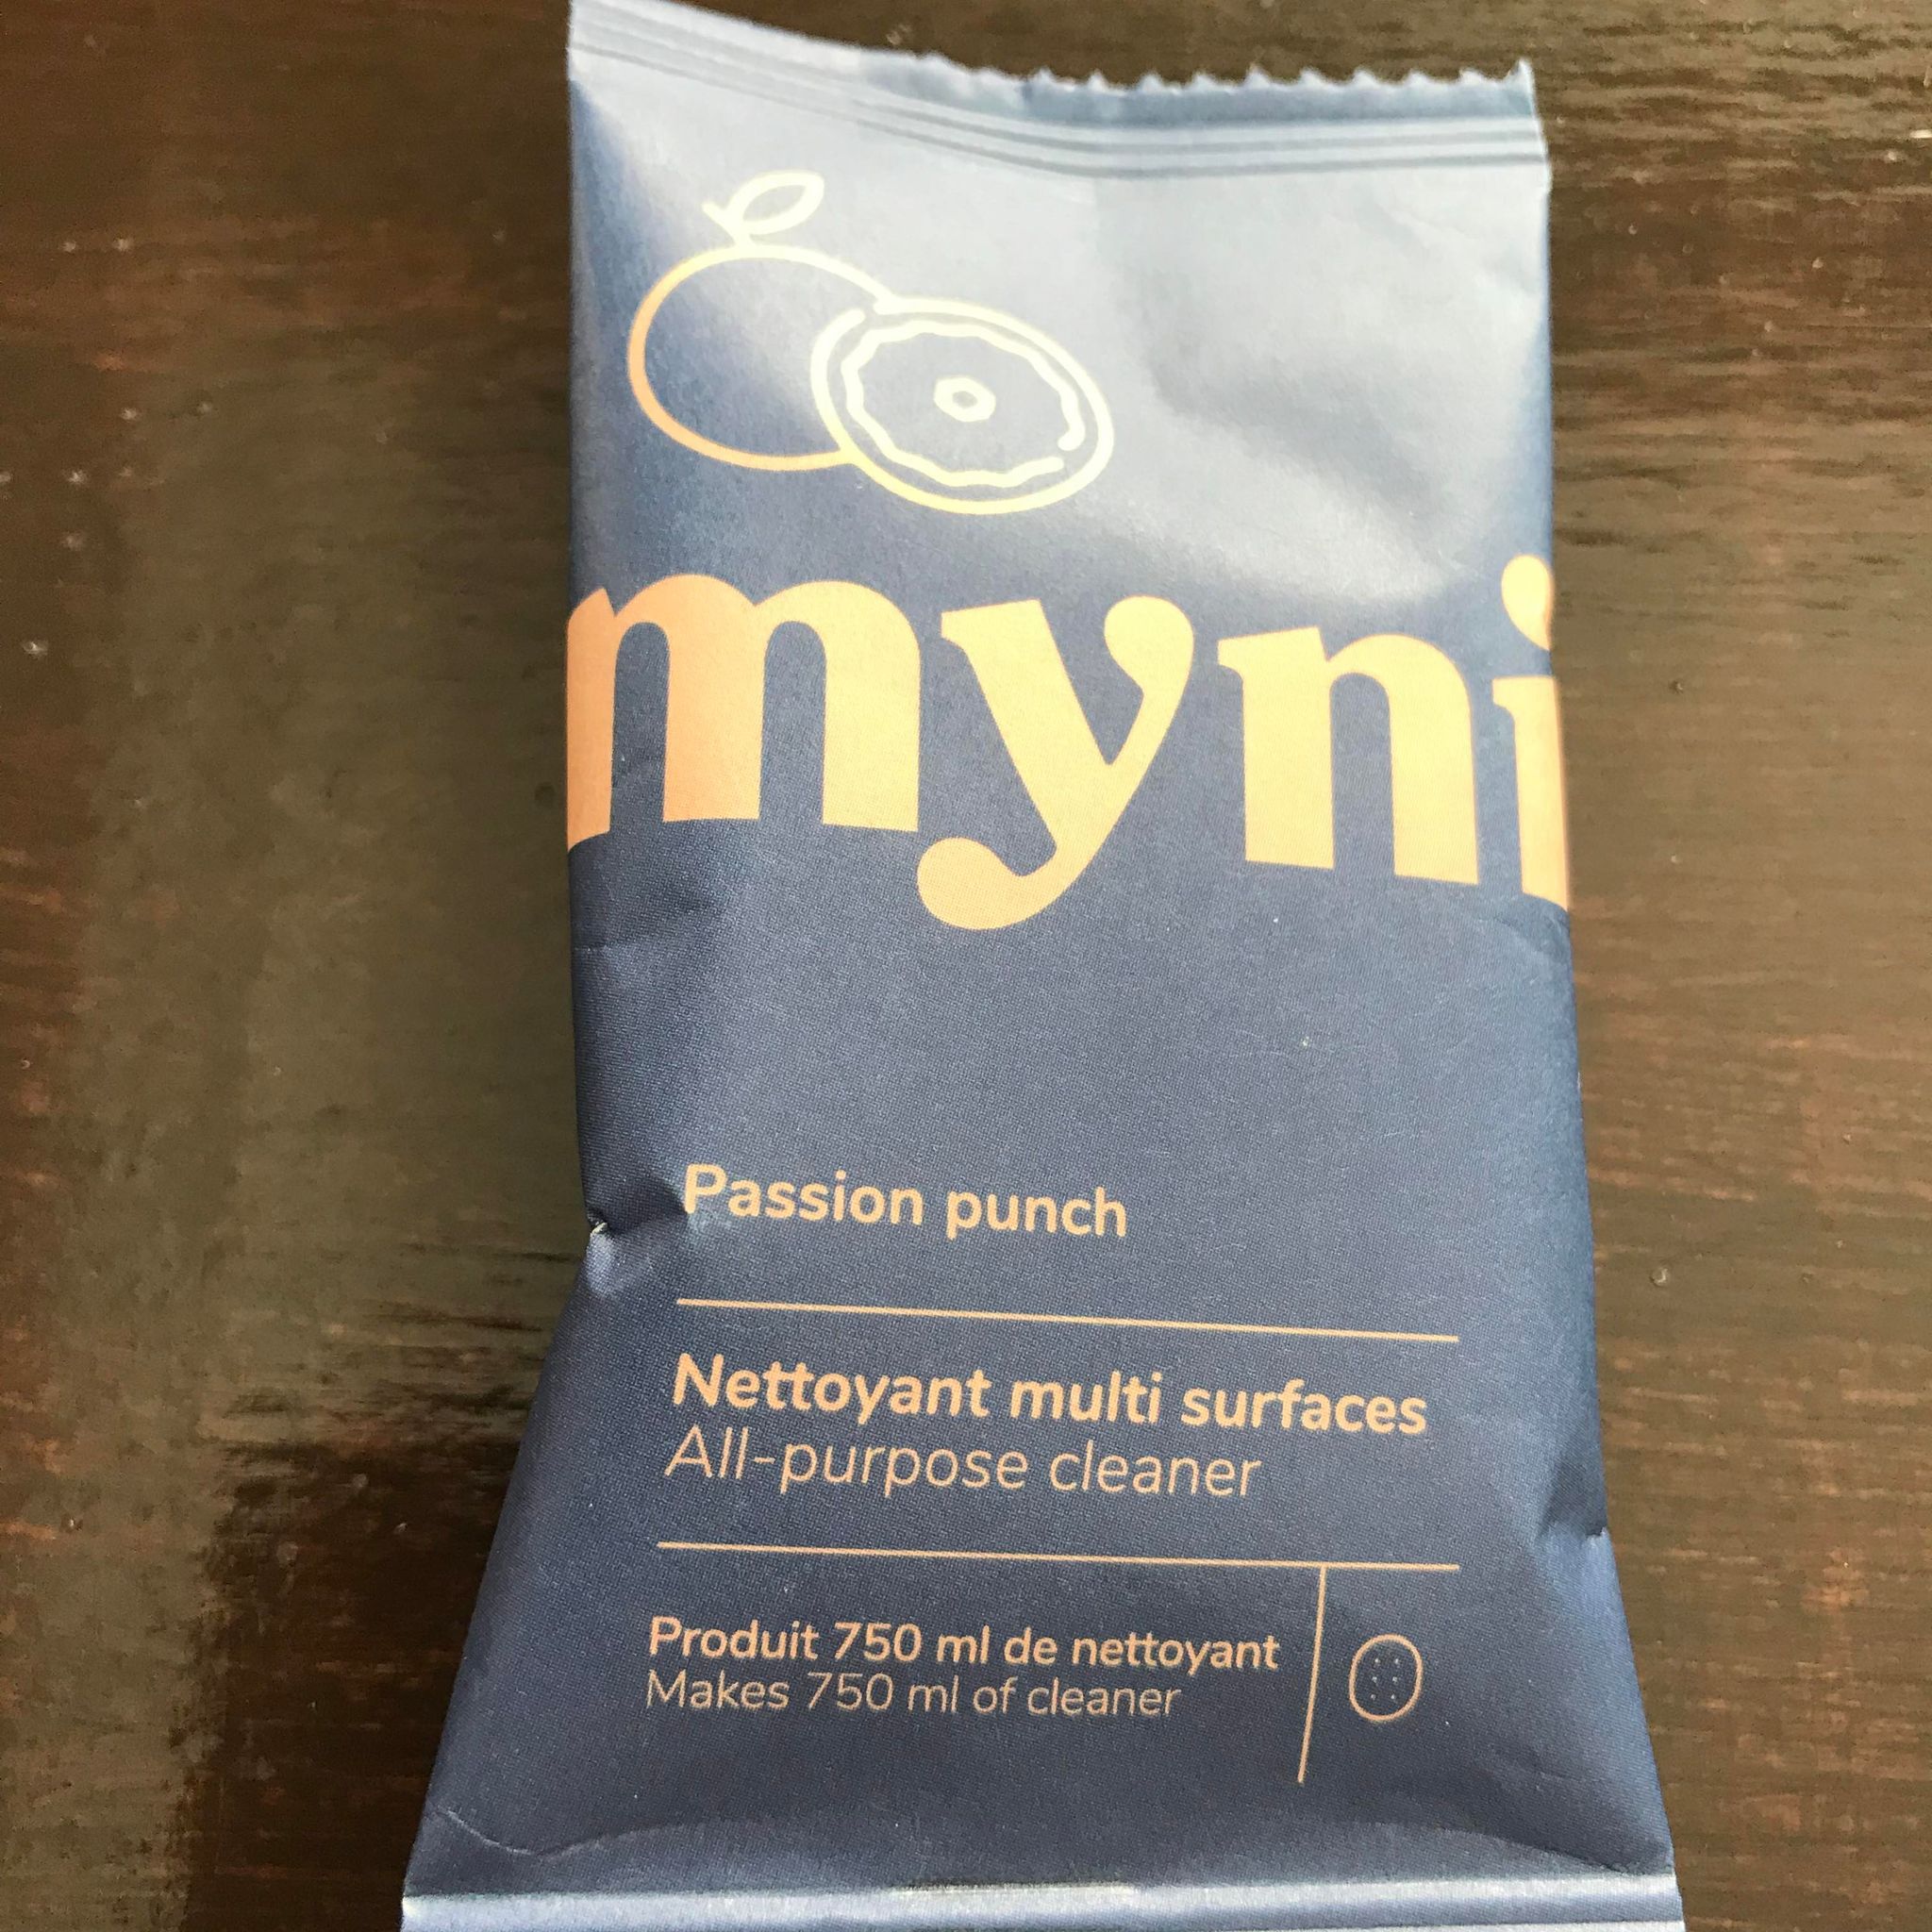 Passion punch grapefruit and mango scented all purpose cleaning tablet in compostable packaging made in canada by myni